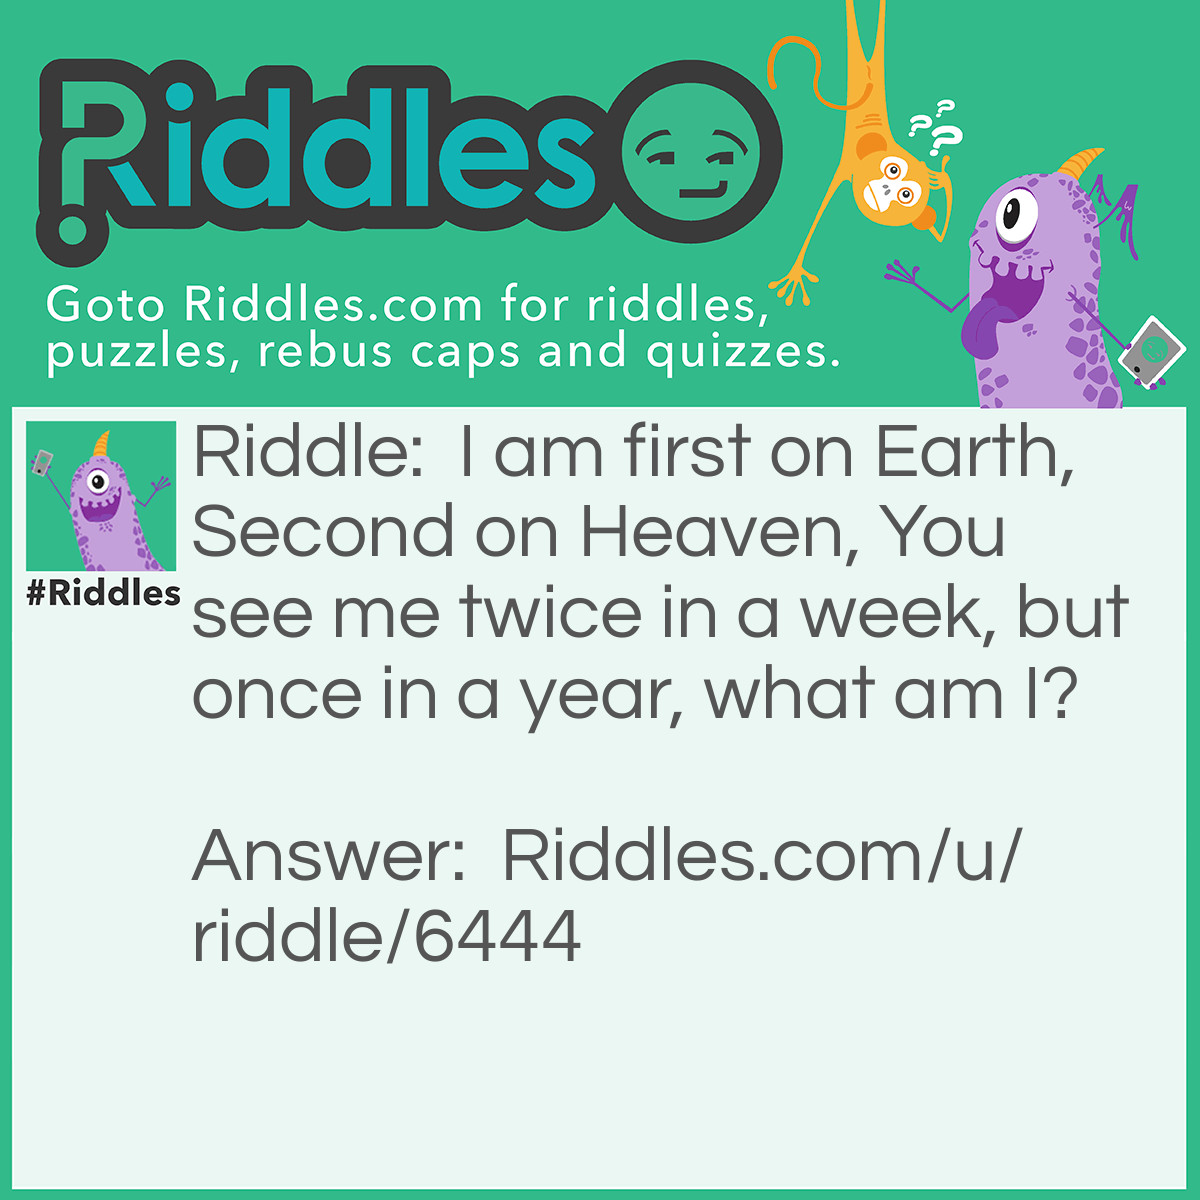 Riddle: I am first on Earth, Second on Heaven, You see me twice in a week, but once in a year, what am I? Answer: Letter E.